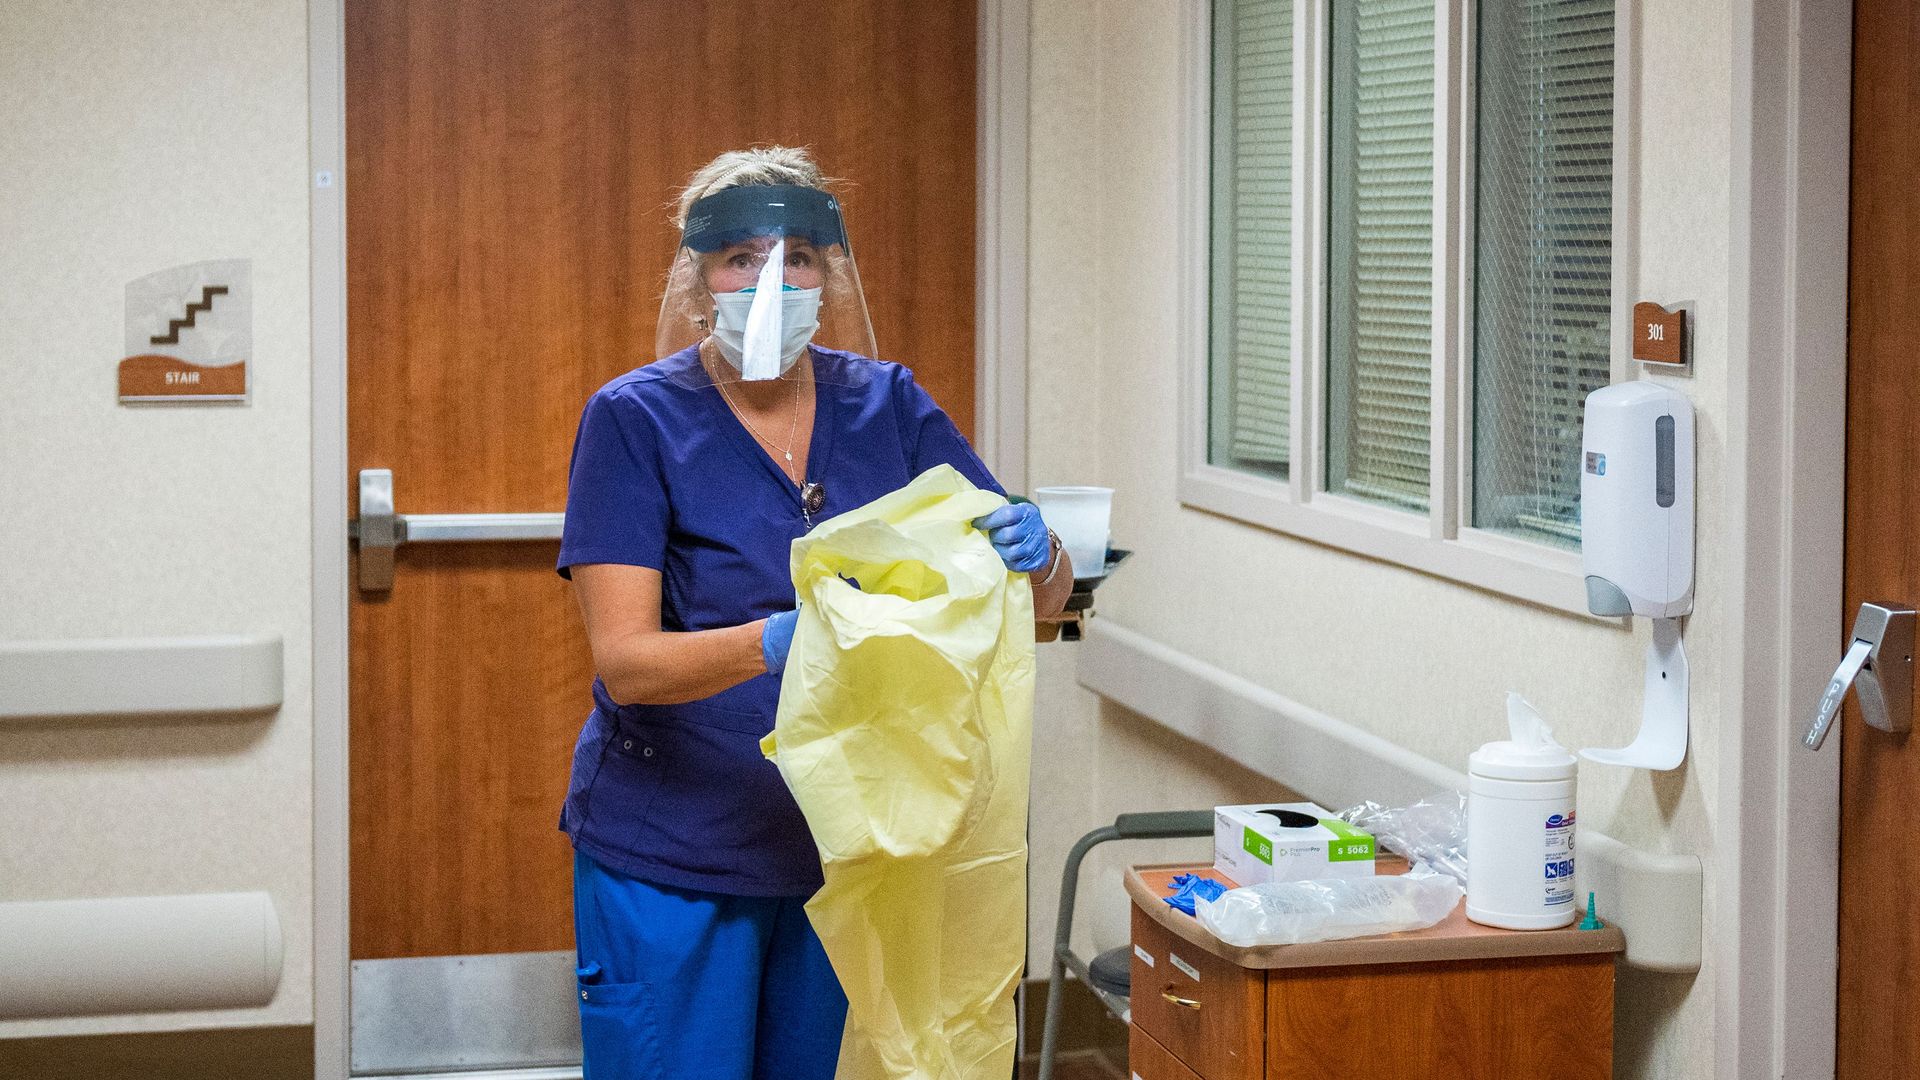 A nurse puts on protective equipment in a hospital